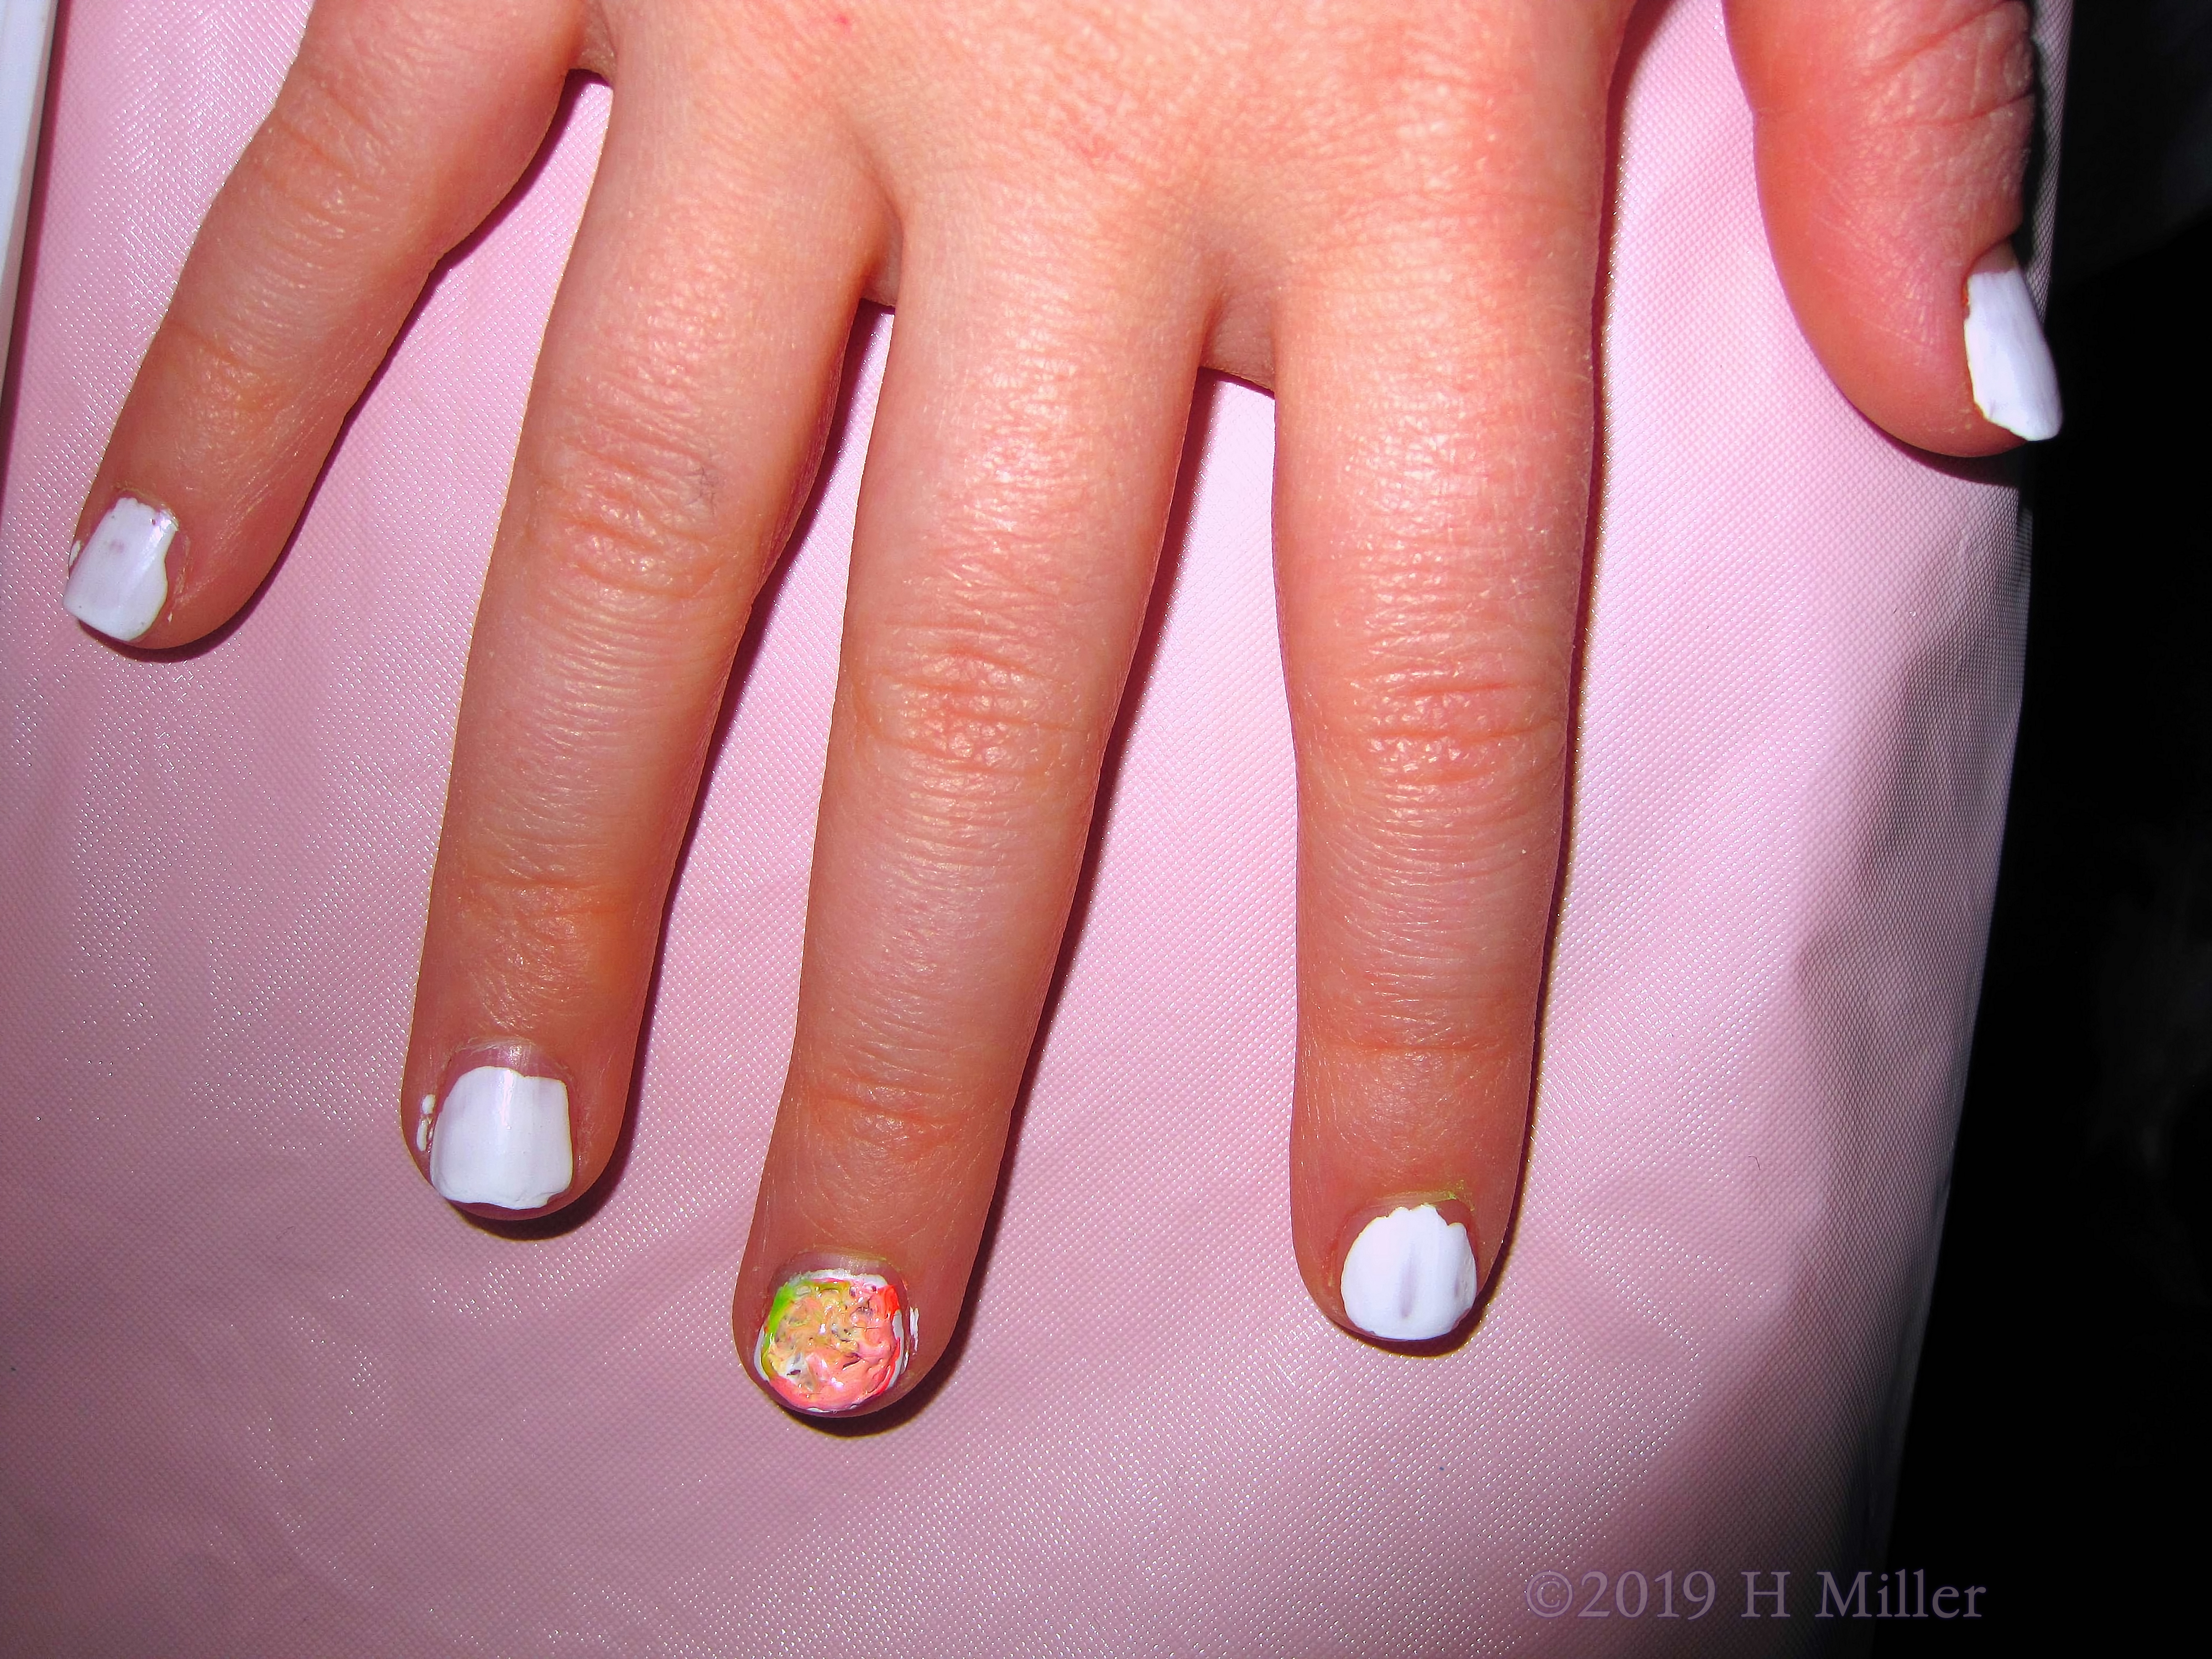 What Lovely Marbled Nail Art For This Guest's Girls Manicure! 